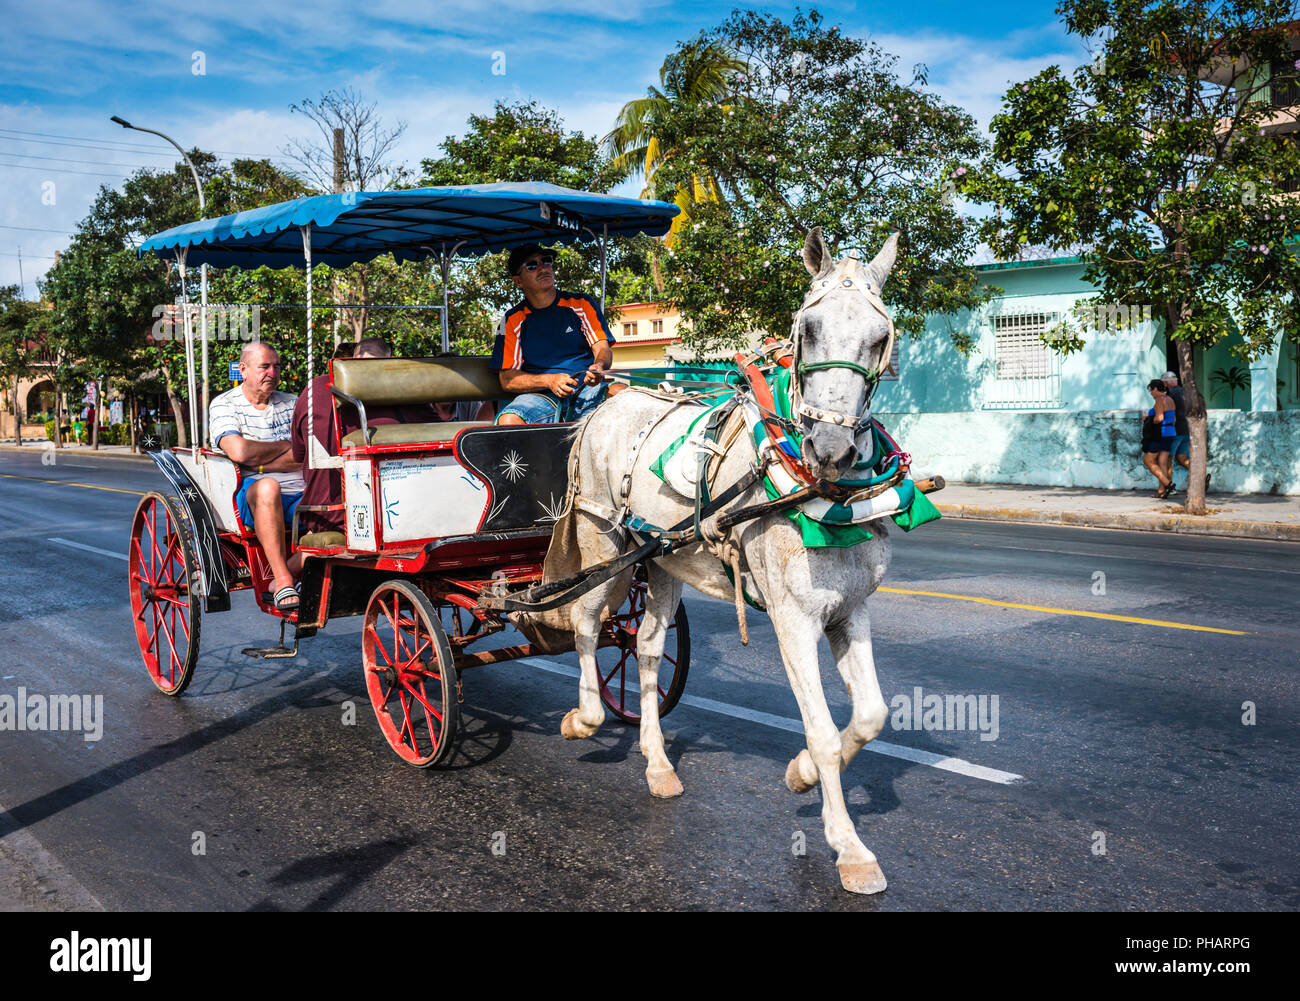 Carriage rides on horse and buggies called Hicacos are a fun way to get around the Cuban beach resort town of Varadero. Stock Photo